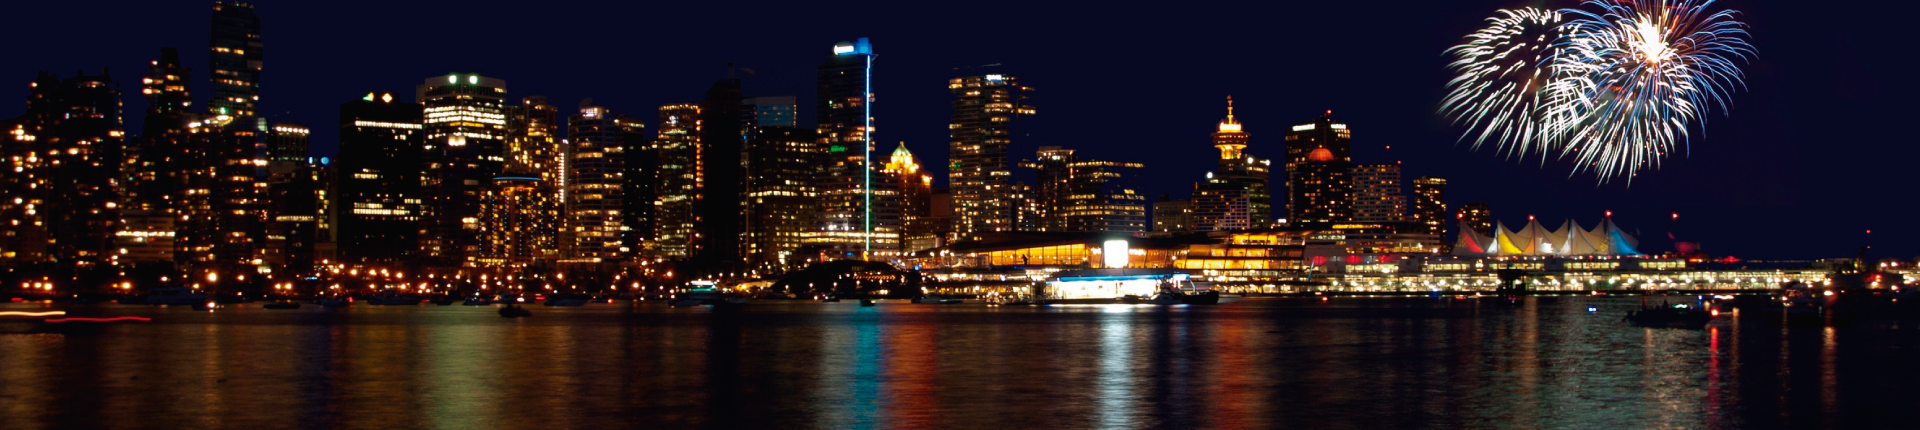 Vancouver-Banner-2-1